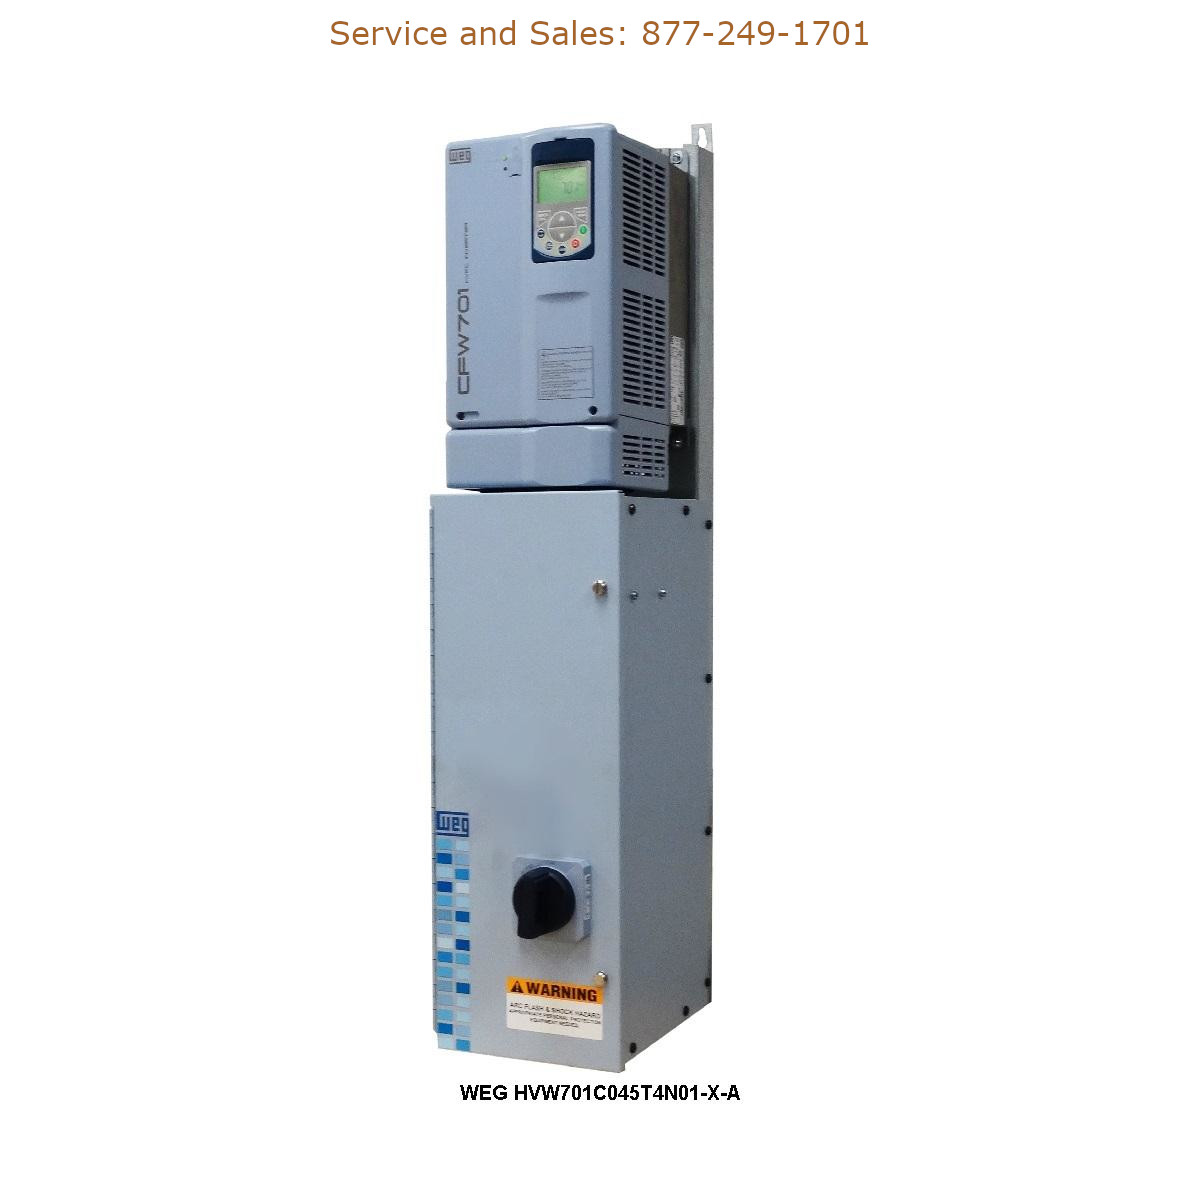 WEG HVW701C045T4N01-X-A WEG Model Number HVW701C045T4N01-X-A WEG Drives, Variable Speed Drives Repair Service, Troubleshooting, Replacement Parts https://gesrepair.com/wp-content/uploads/2022/WEG/WEG_HVW701C045T4N01-X-A_Drives_Variable_Speed_Drives.jpg